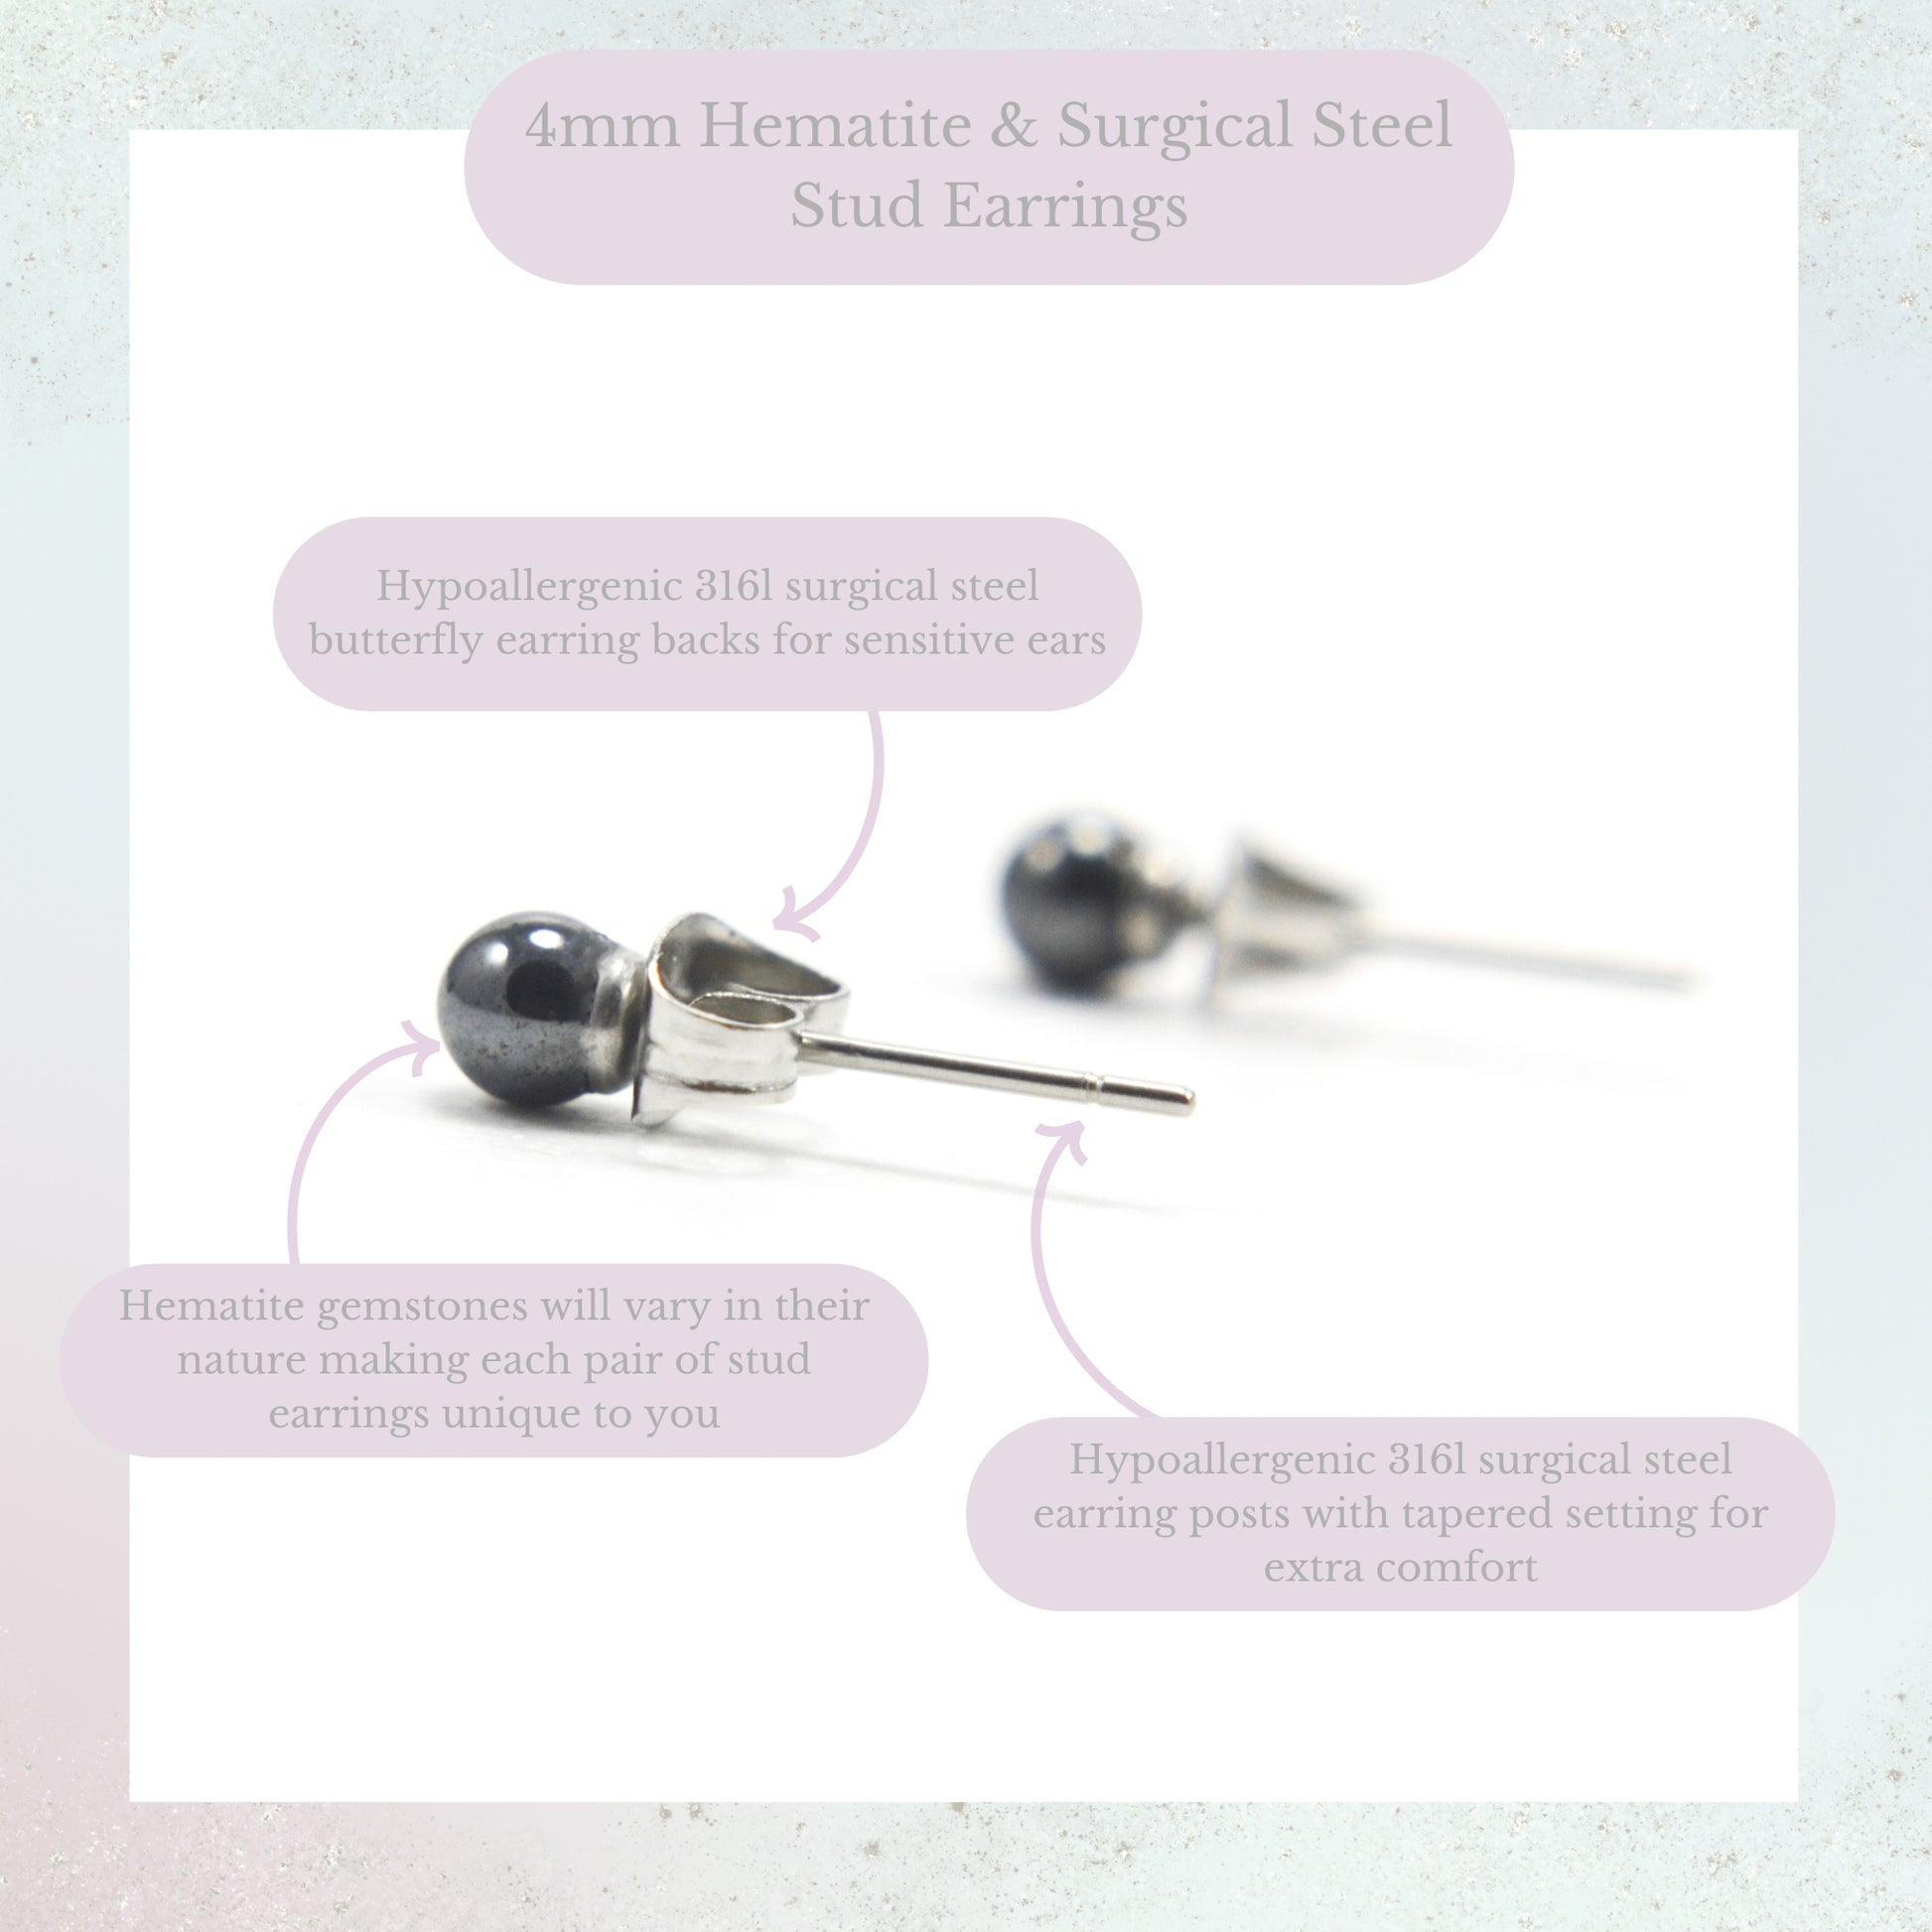 Product information graphic for 4mm Hematite & surgical steel stud earrings